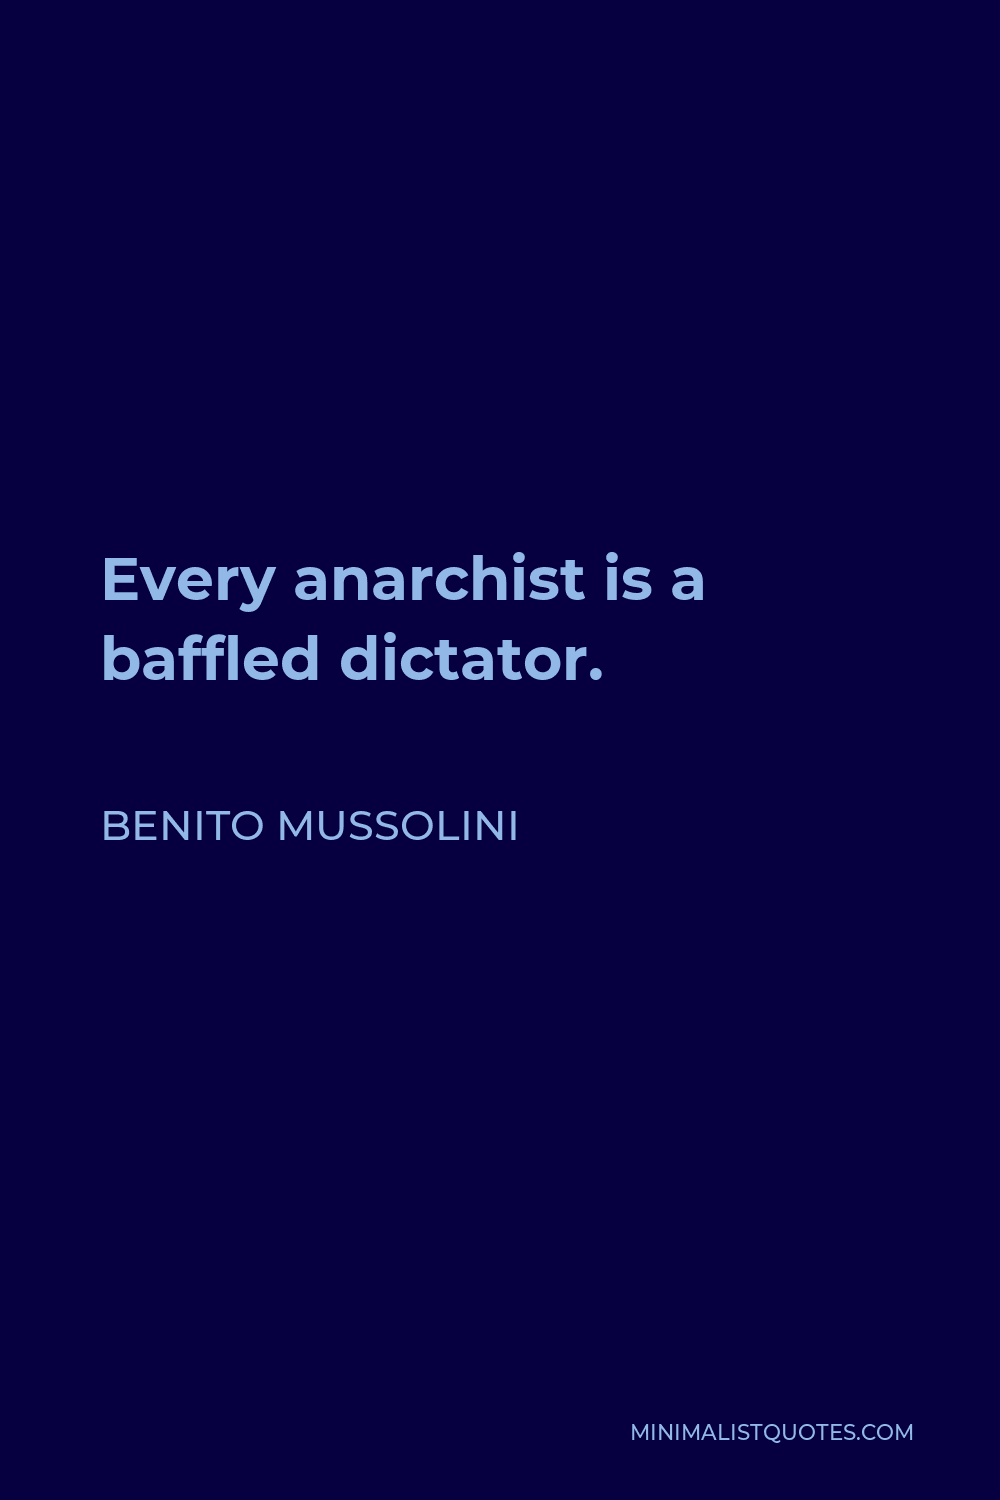 Benito Mussolini Quote - Every anarchist is a baffled dictator.